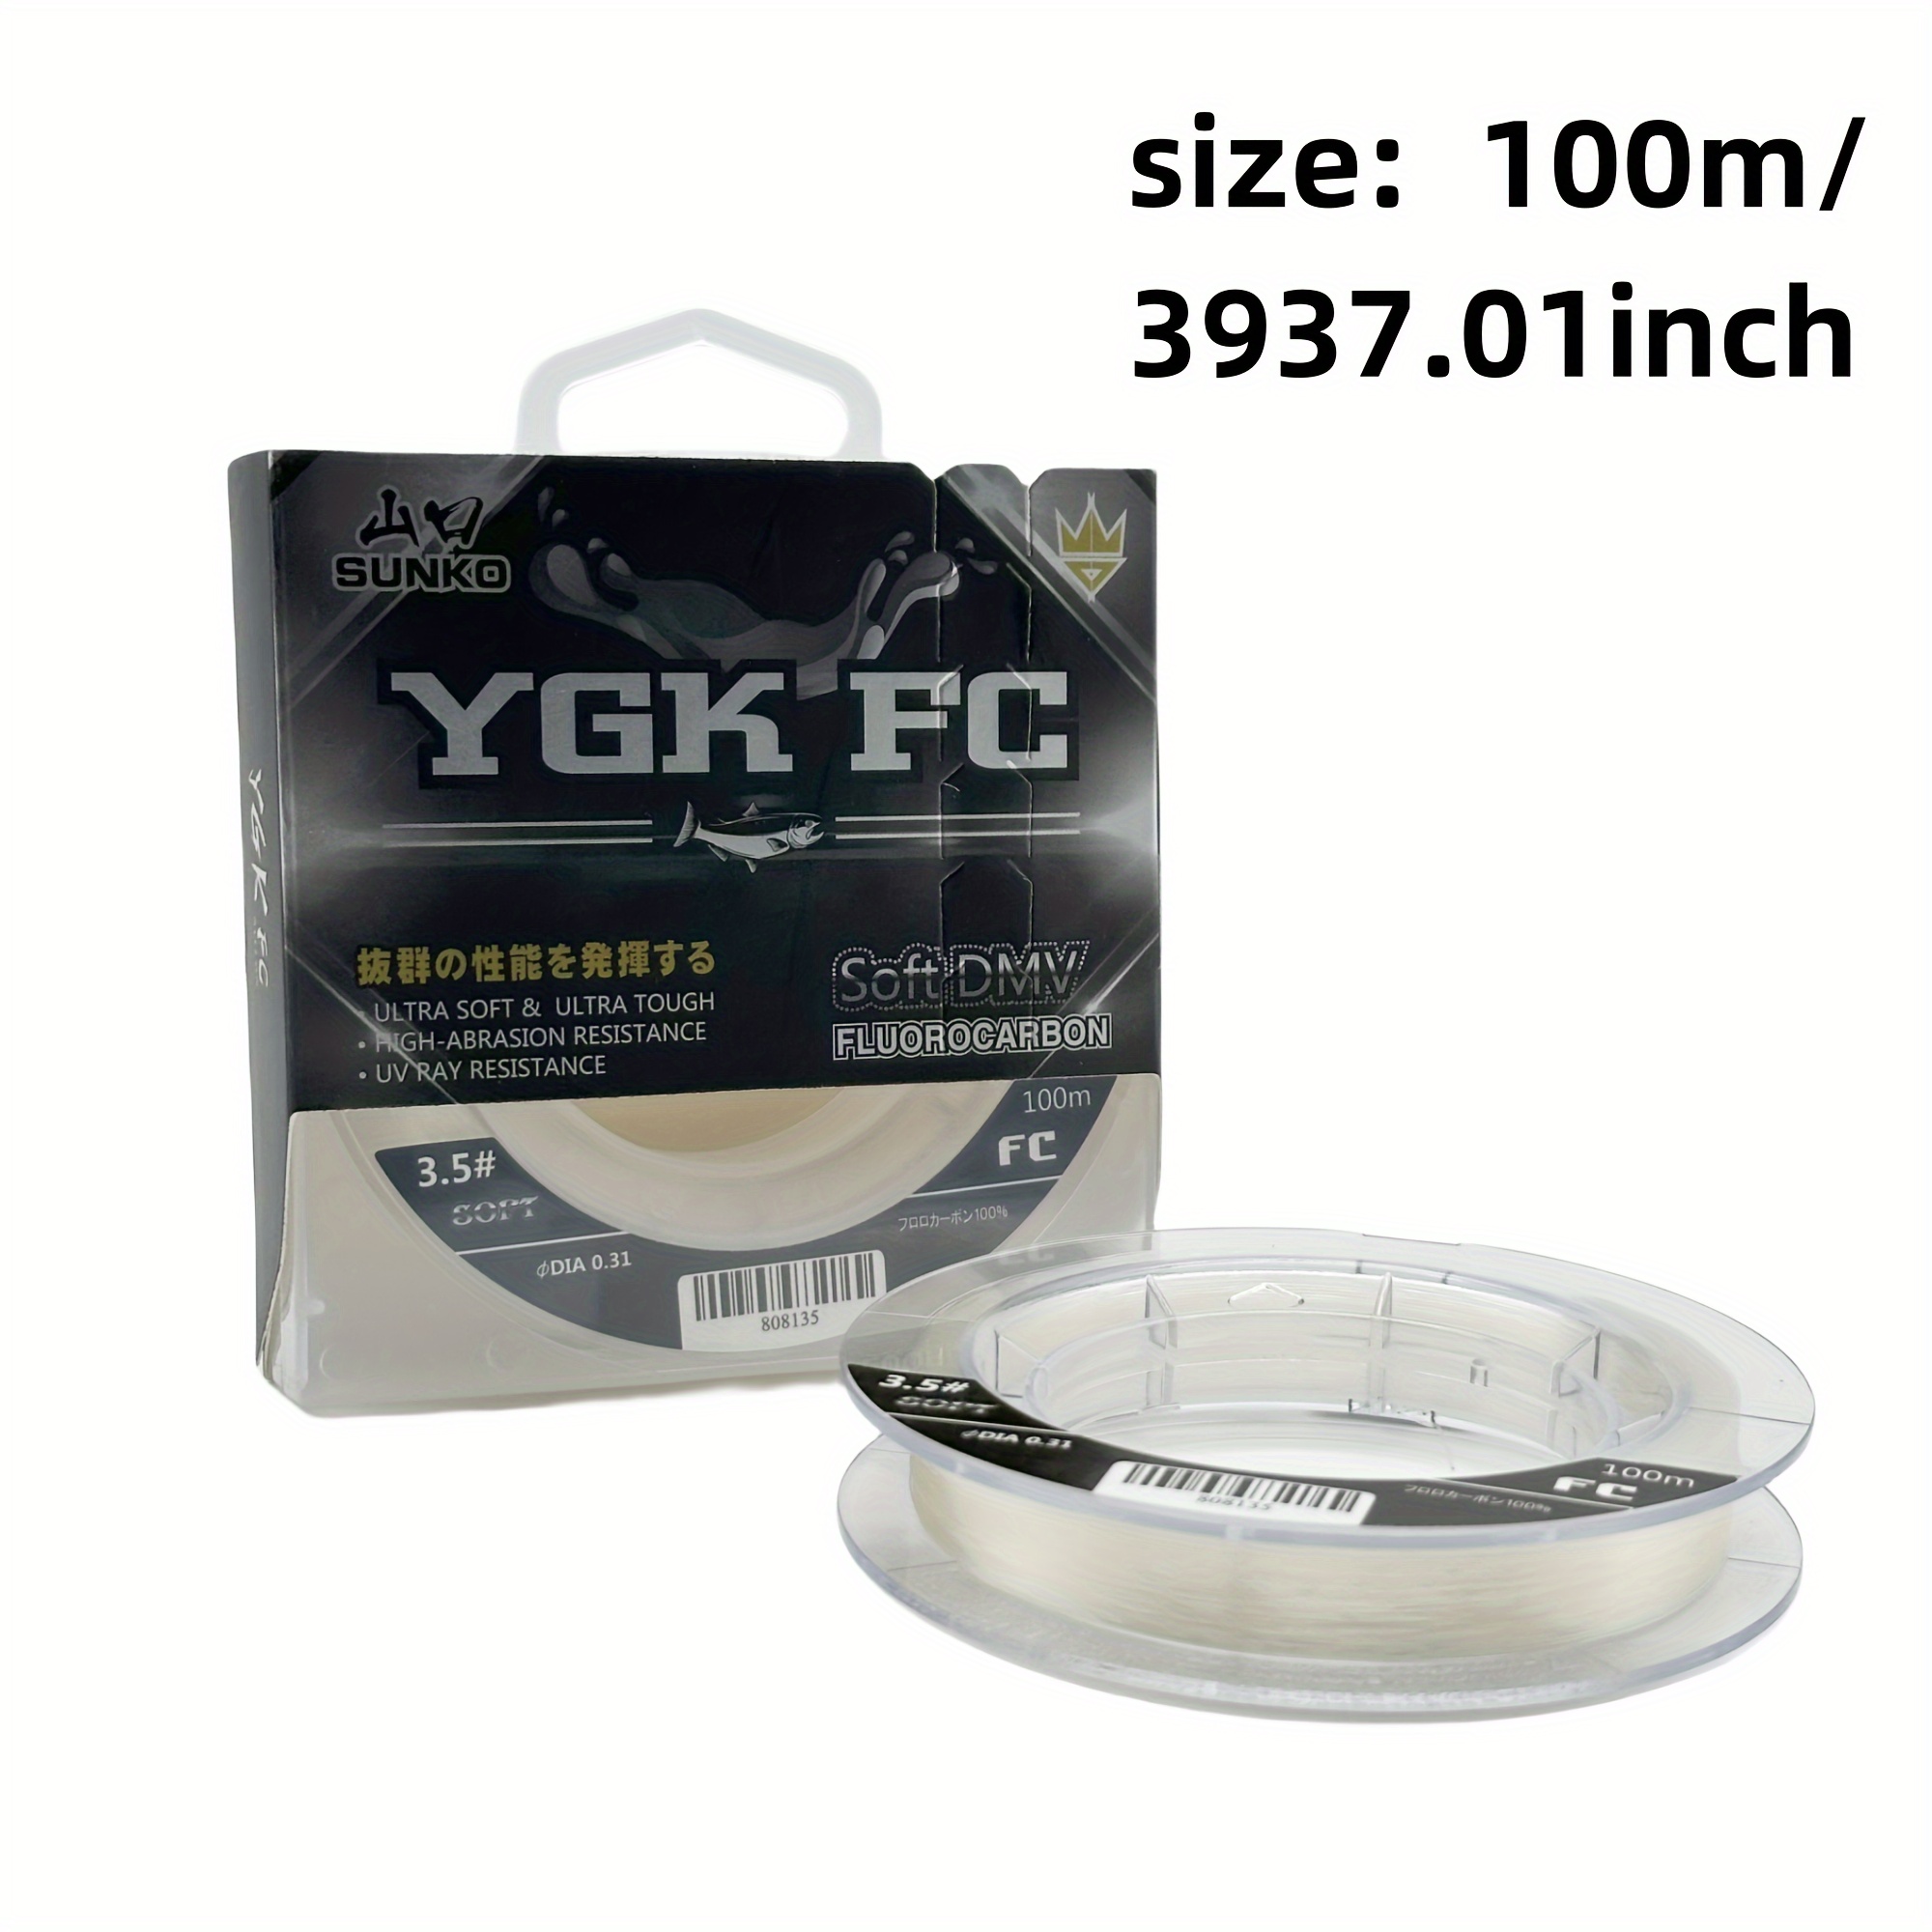 Can this be used as leader line like regular fluorocarbon, or does